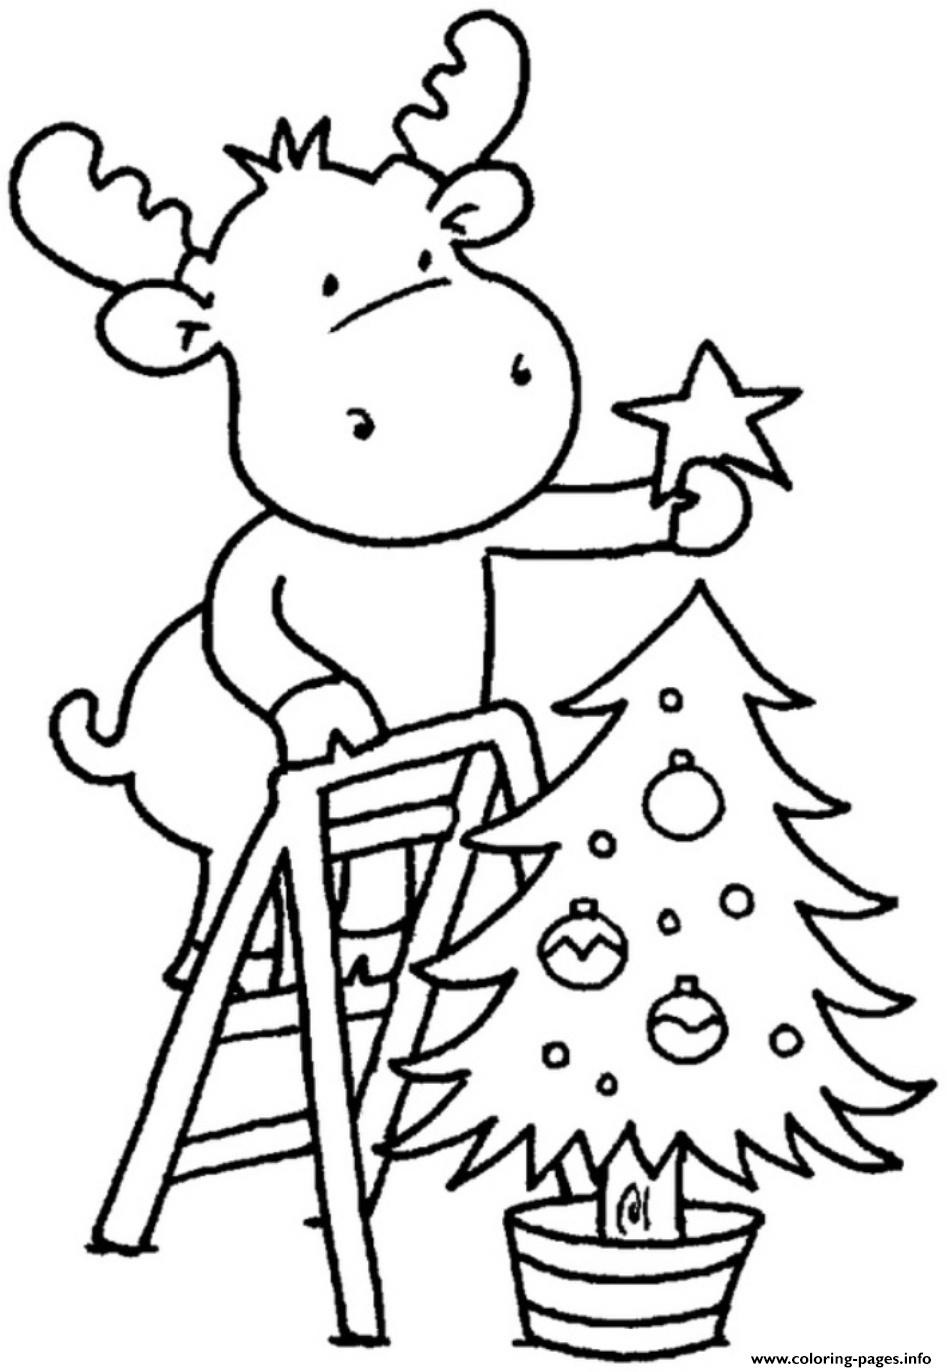 Printable Christmas Trees Coloring Pages Toddler
 Christmas Tree For Children Coloring Pages Printable